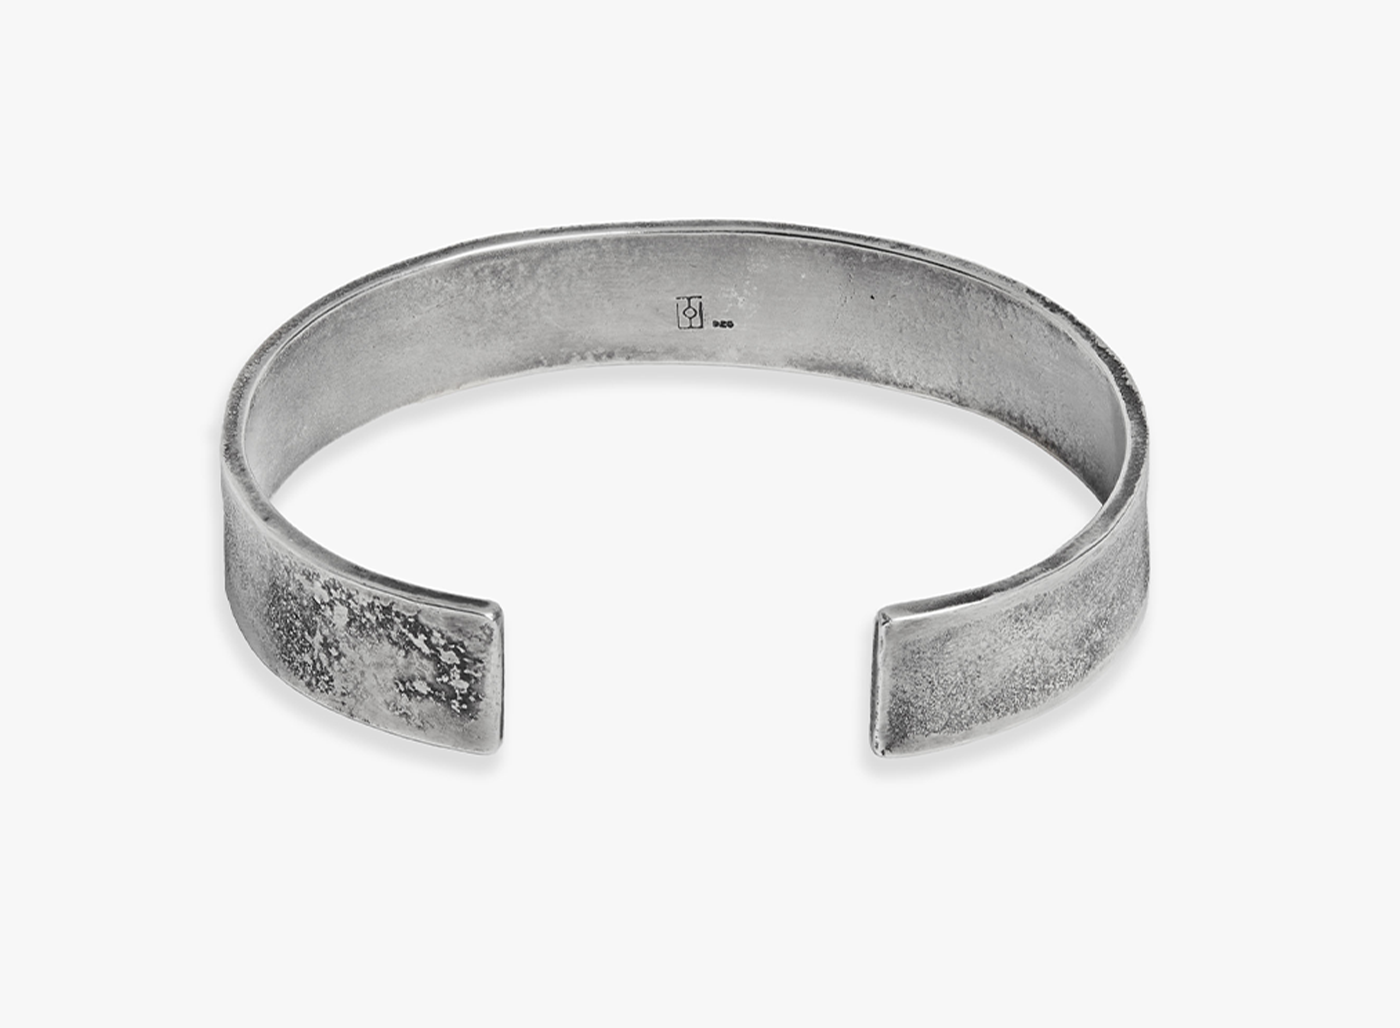 DISTRESSED FLAT CUFF 405: this sterling silver cuff has been hand-forged, beaten and distressed